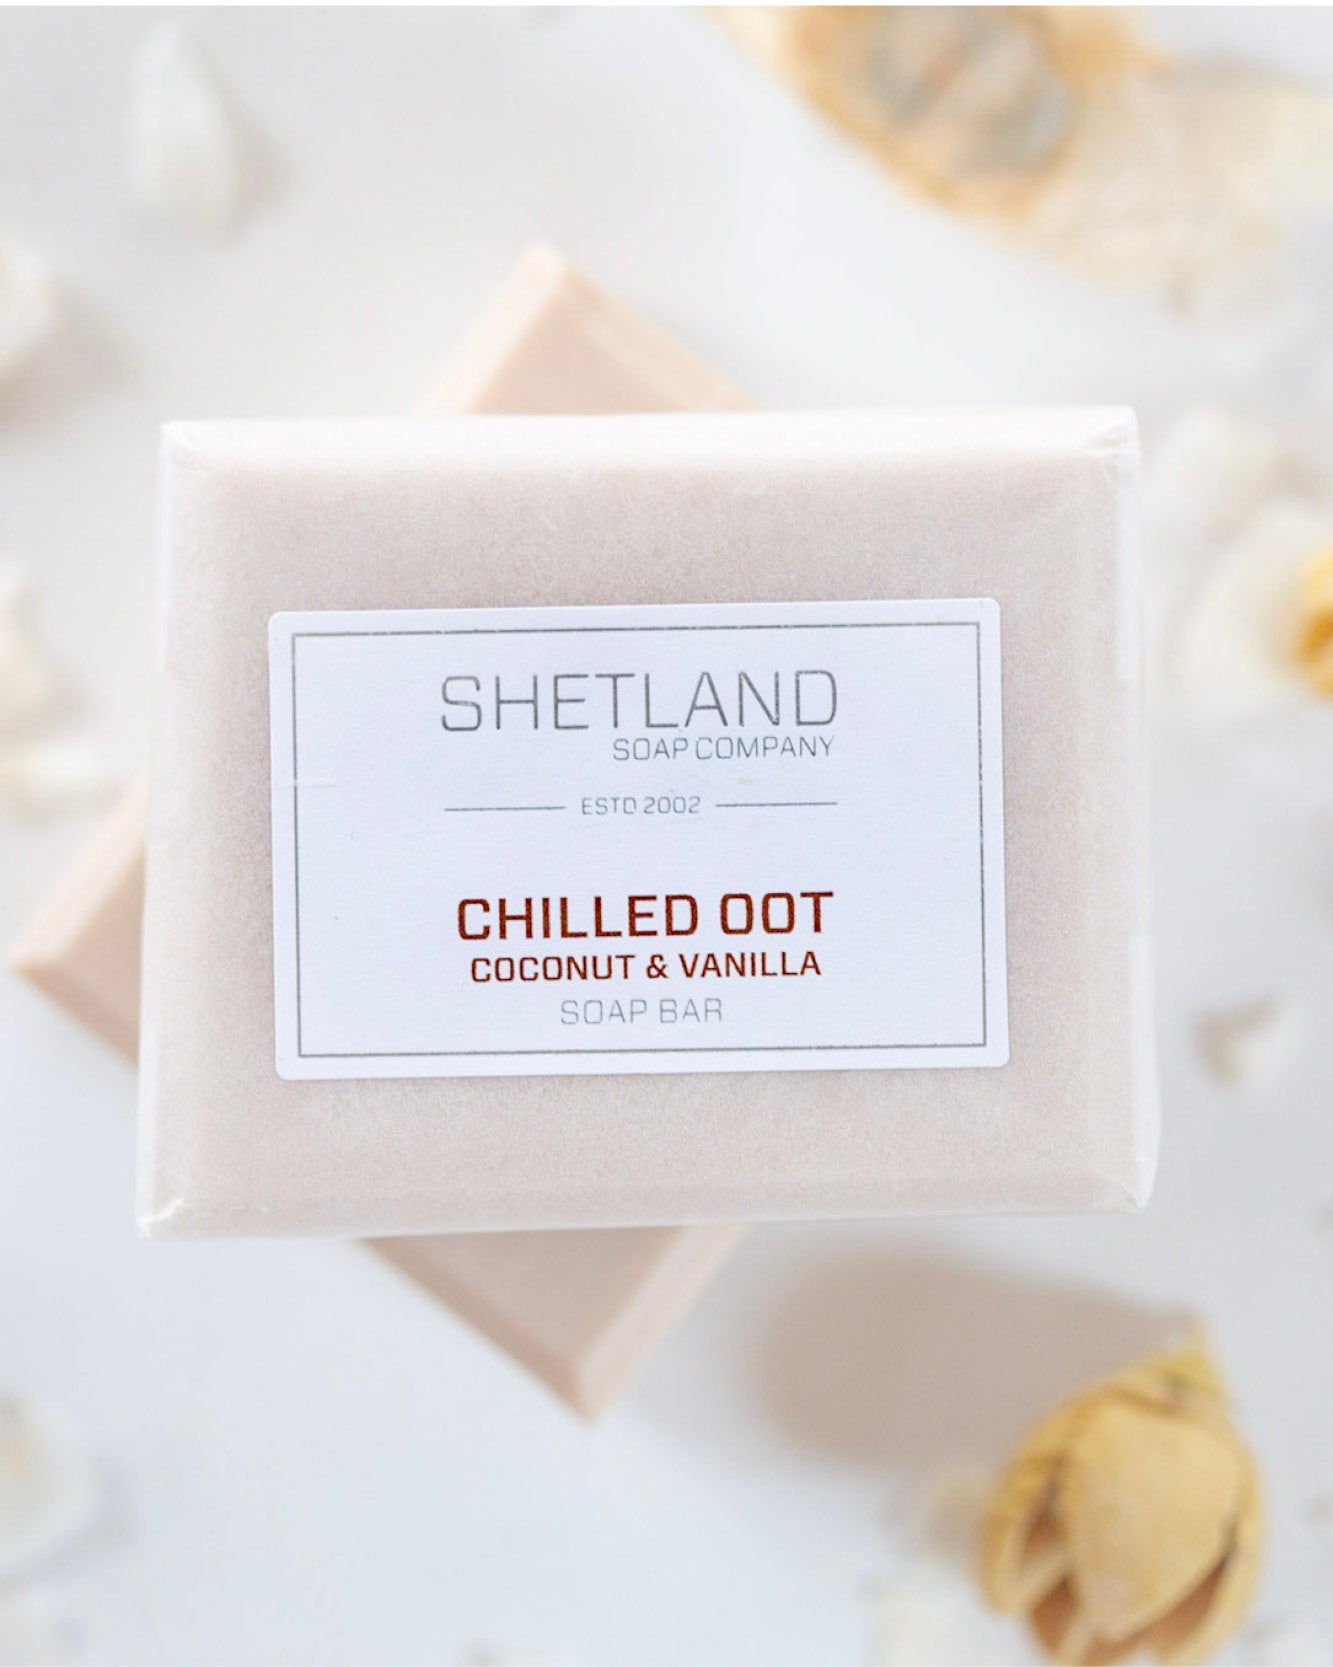 CHILLED OOT SOAP BAR